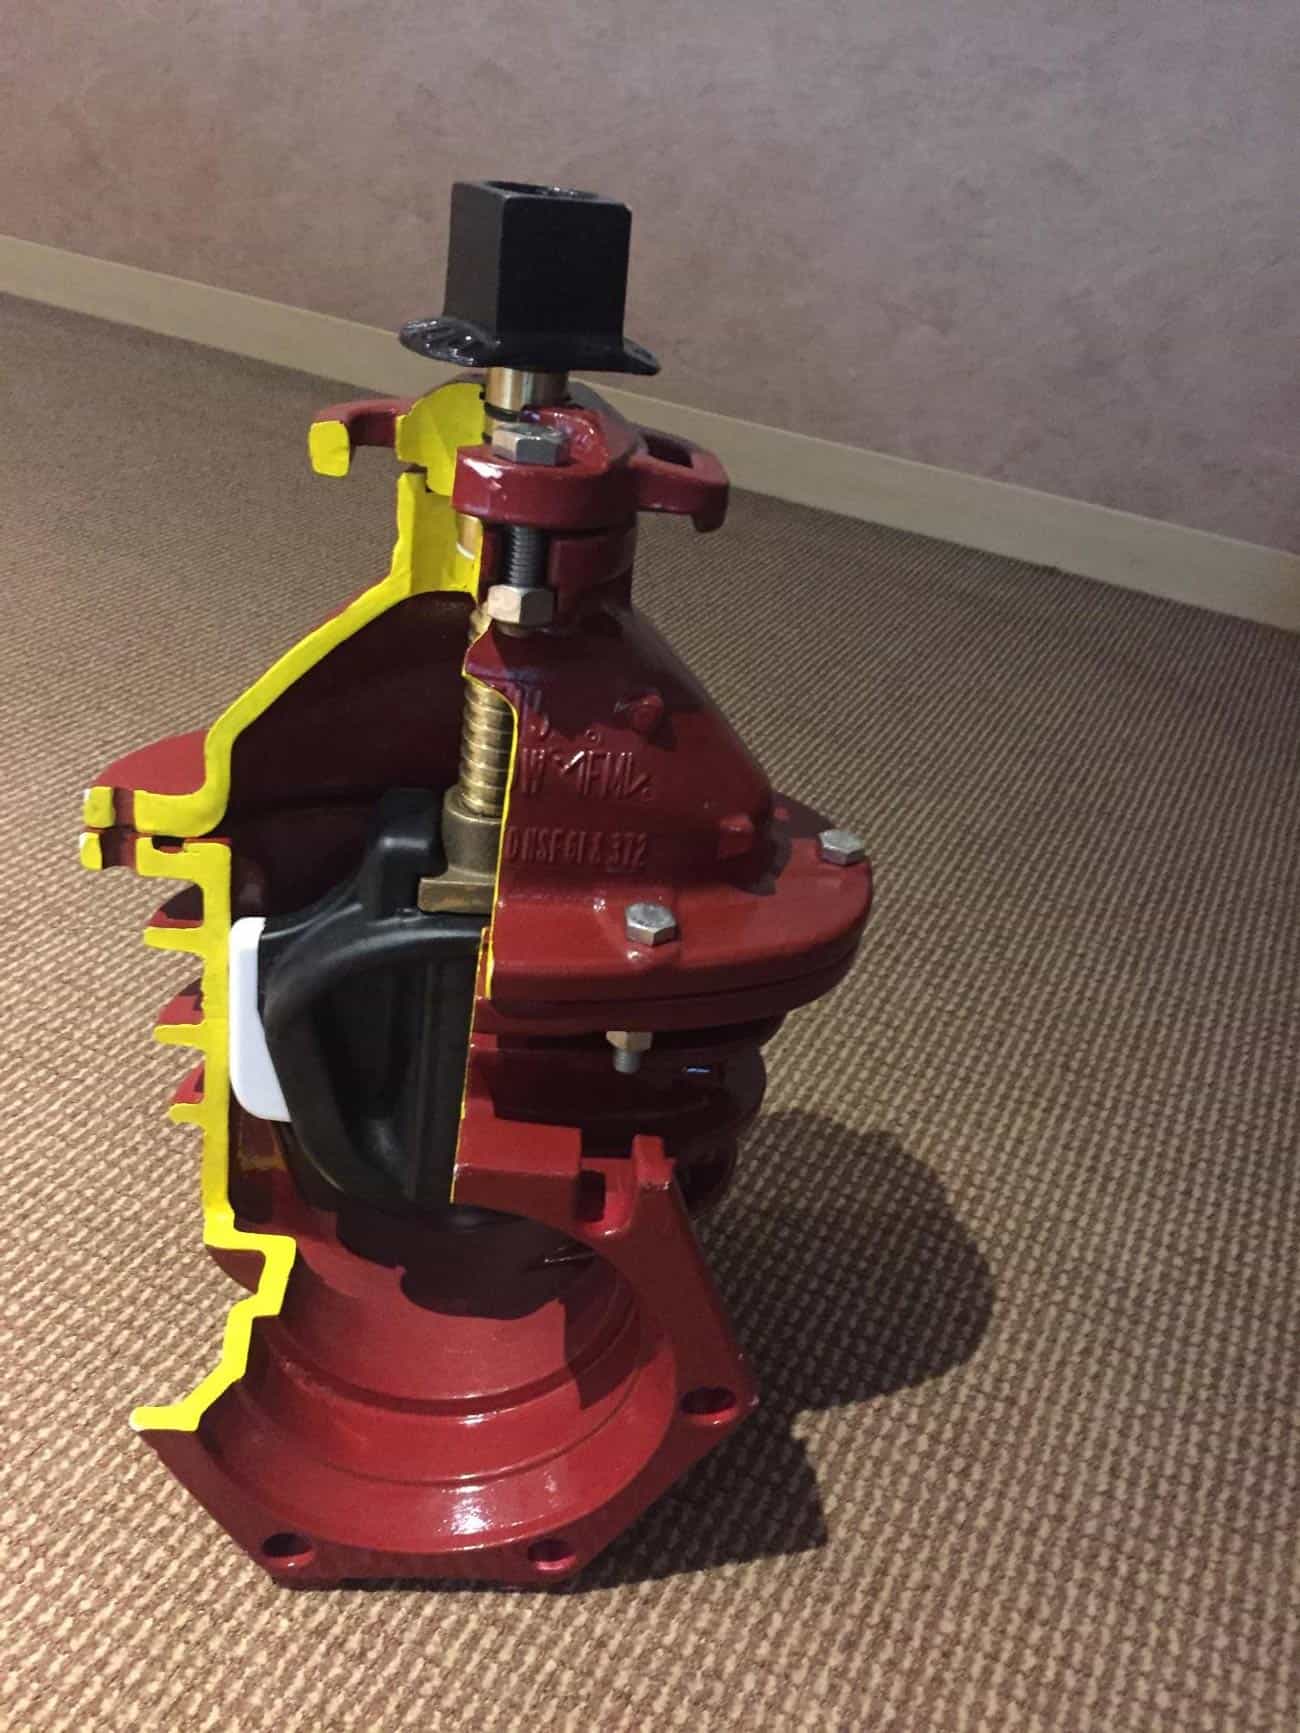 Red and yellow standalone fire hose valve installed on a carpeted floor